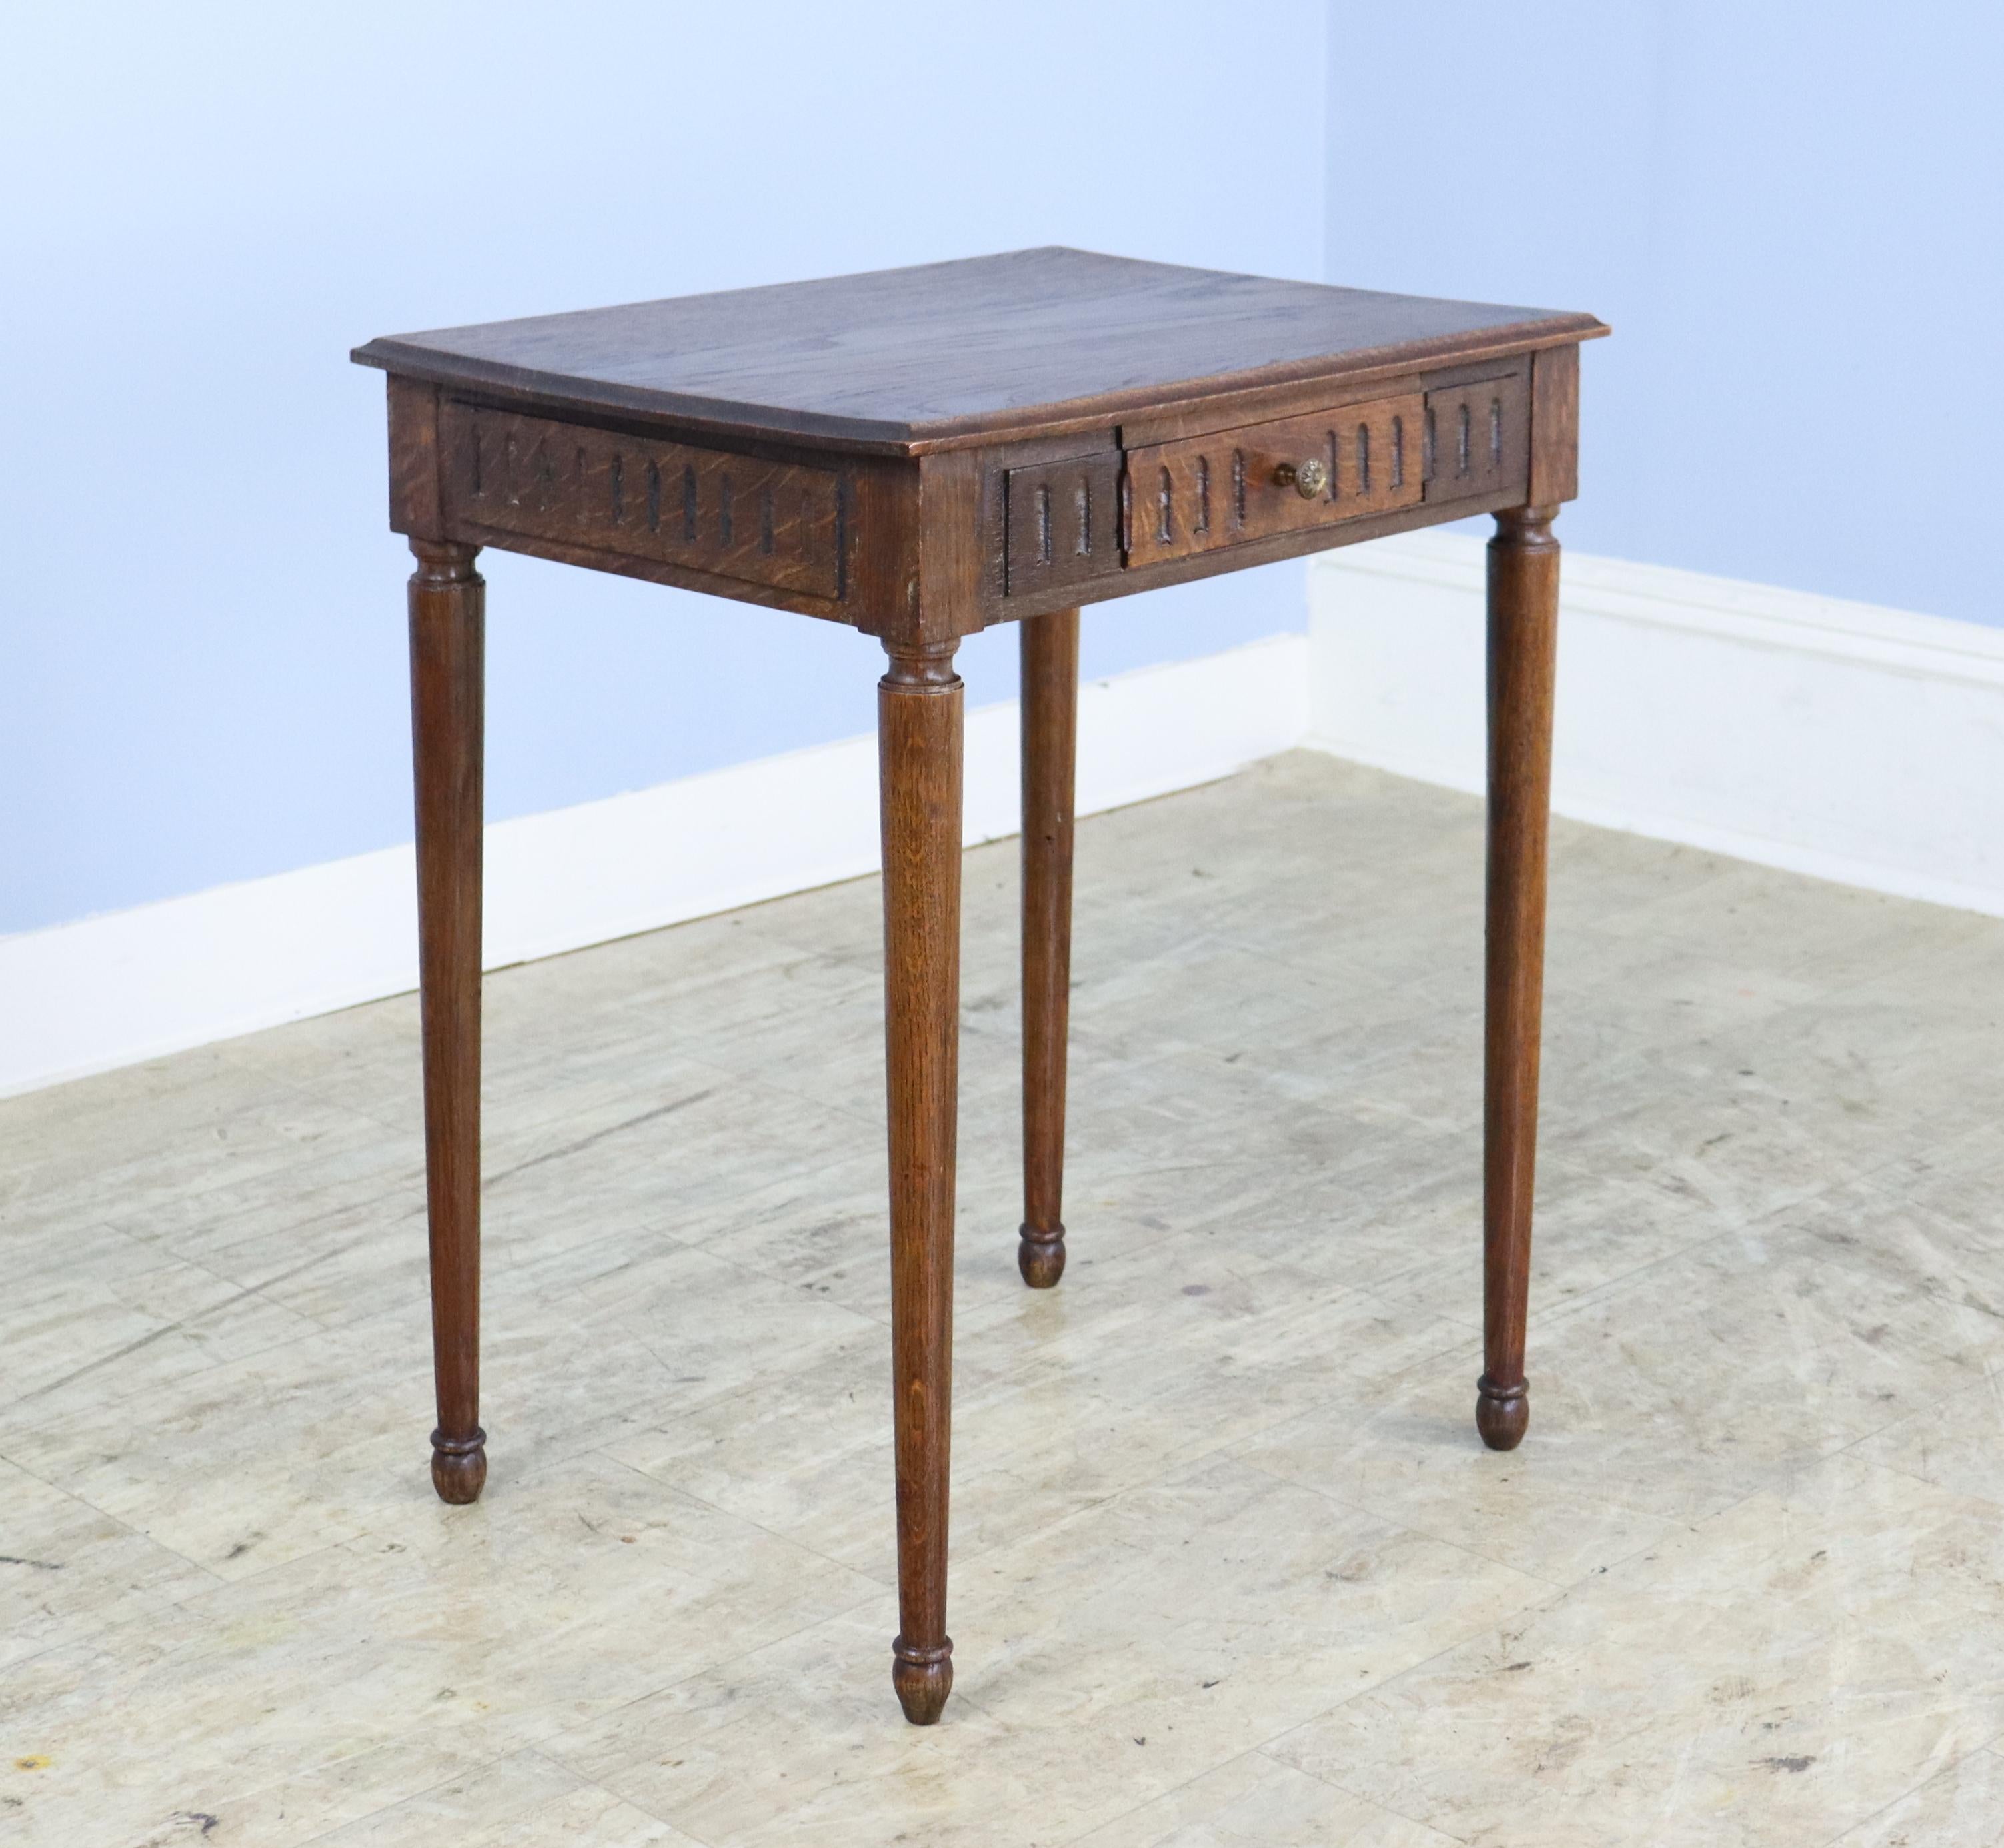 A charming pair of French oak side tables that would make excellent night stands.  The decorative carving goes all the way around the top.  Single roomy drawer and spider legs.  There is a small crack toward the back of one of the pair, which has